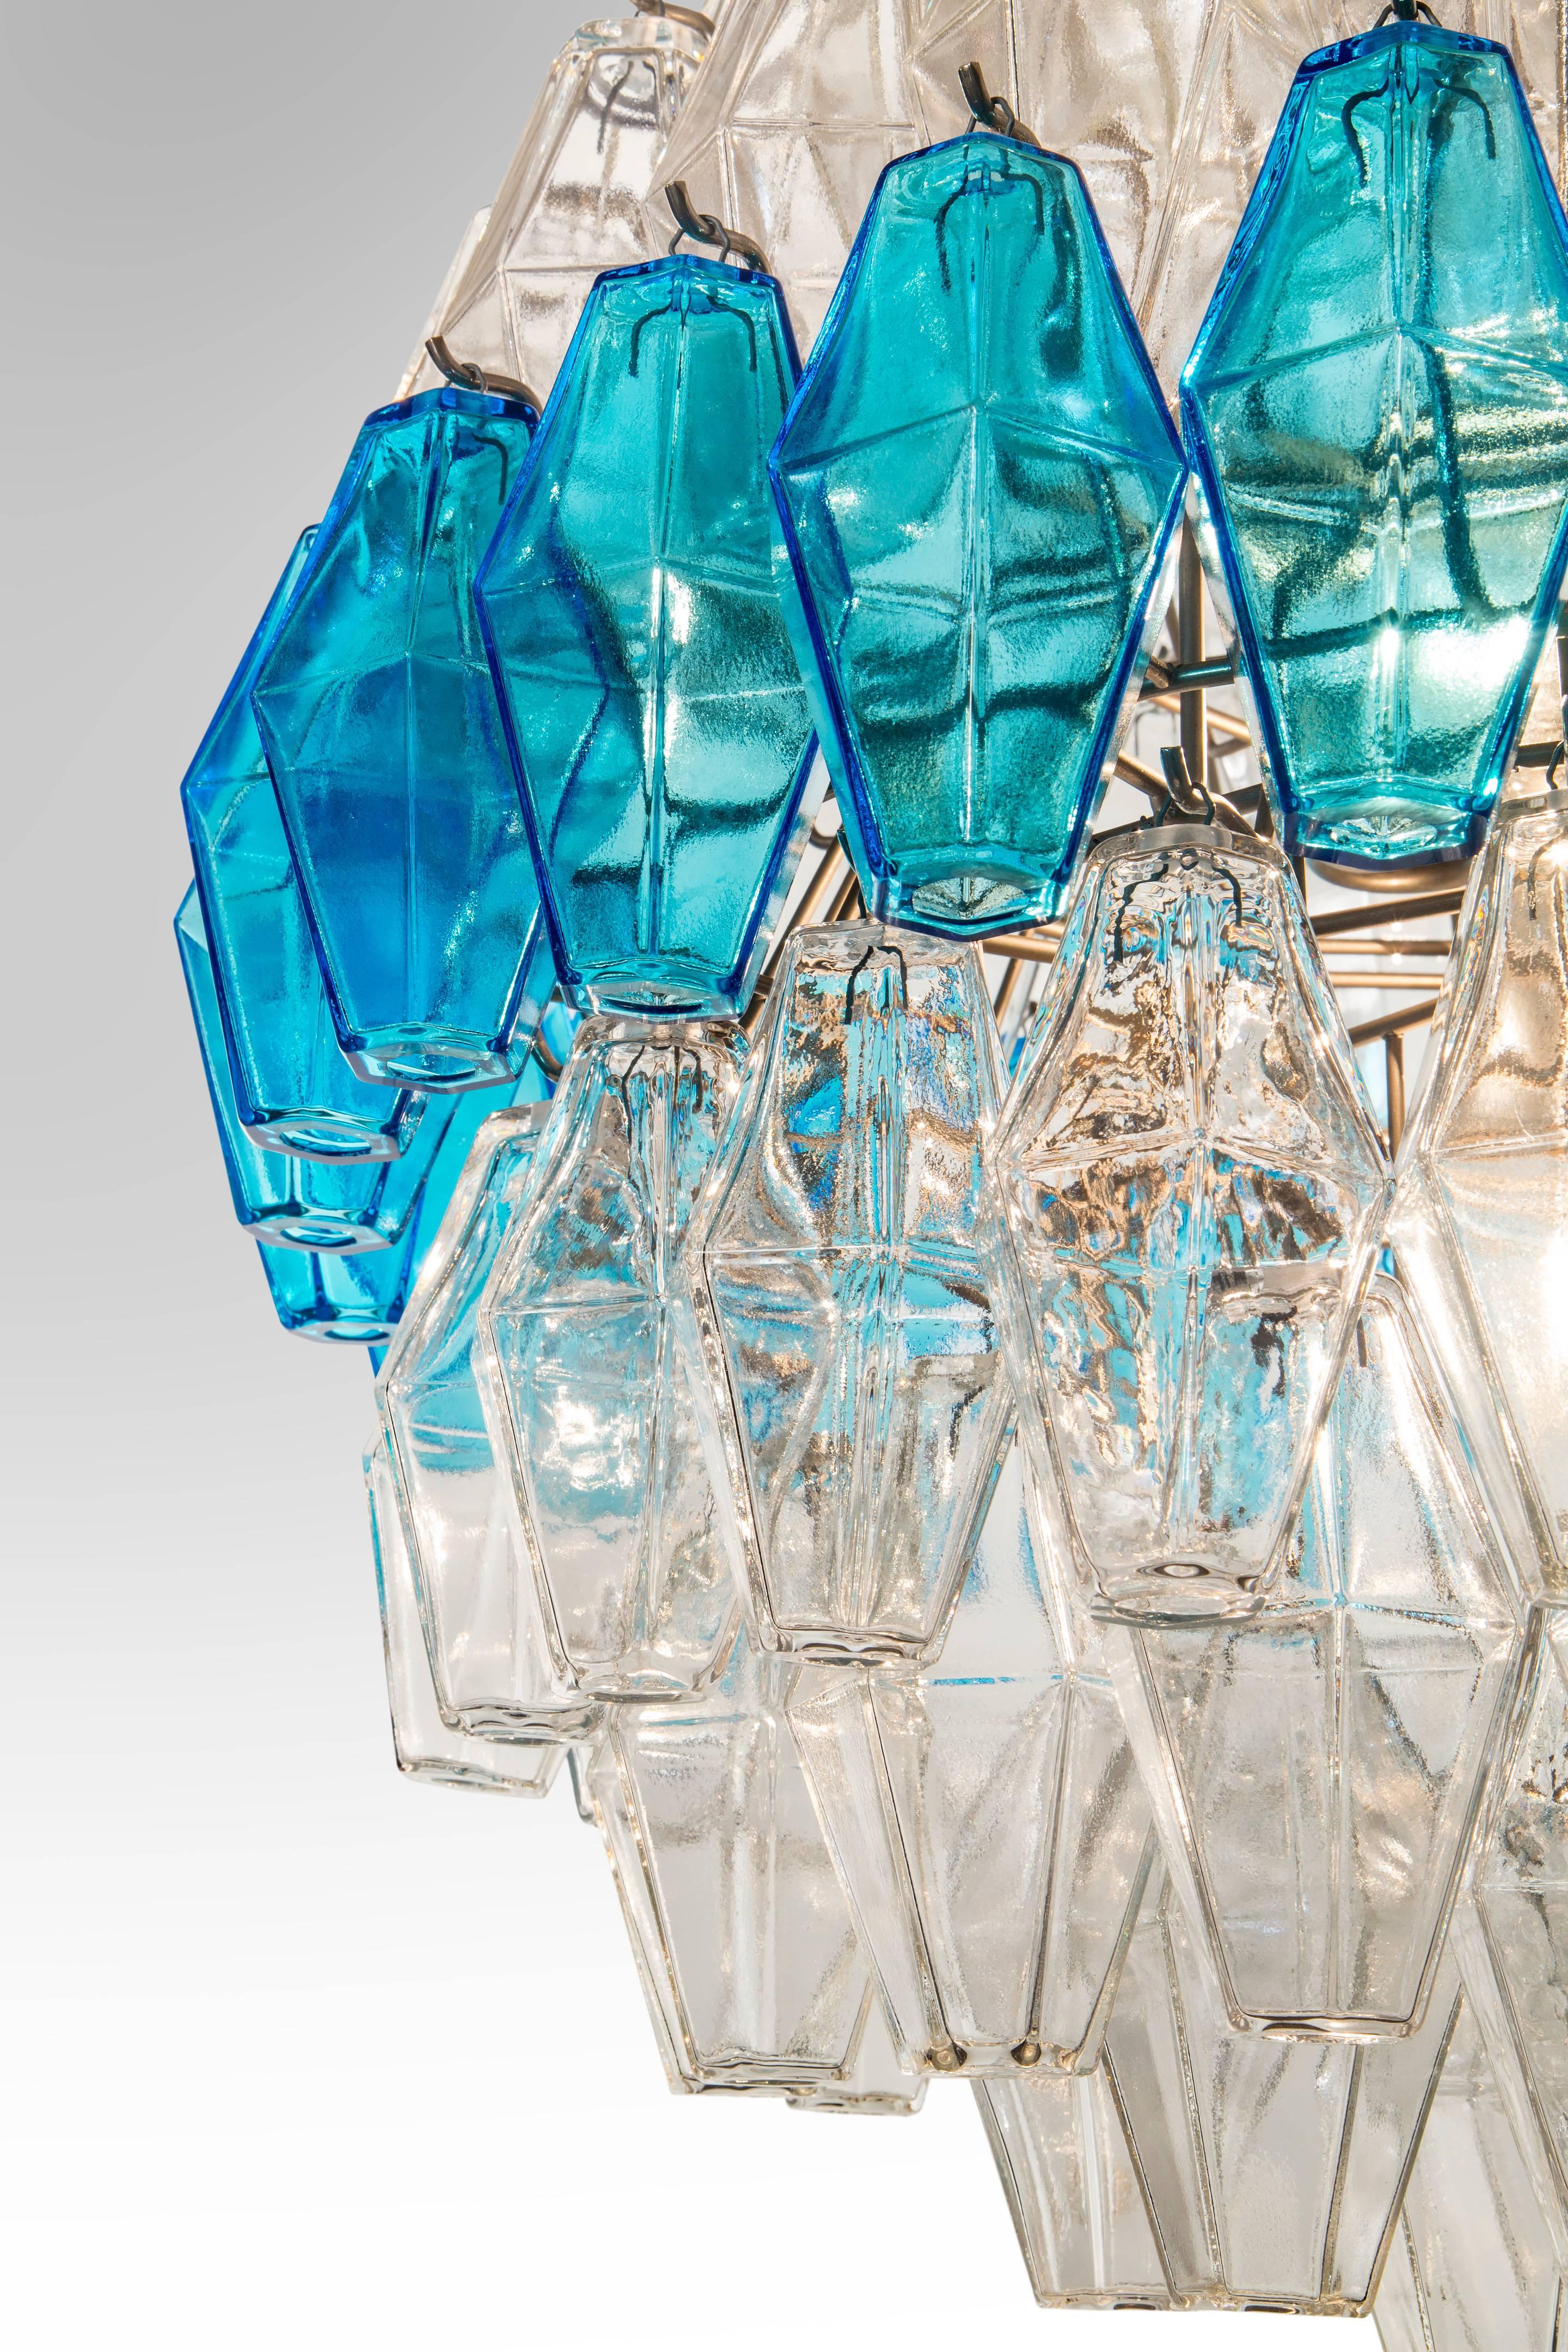 A rare spherical example of beautiful colorless and blue glass. Composed of ten tiers of polyhedral-shaped glass pendants, all colorless except the center tier.